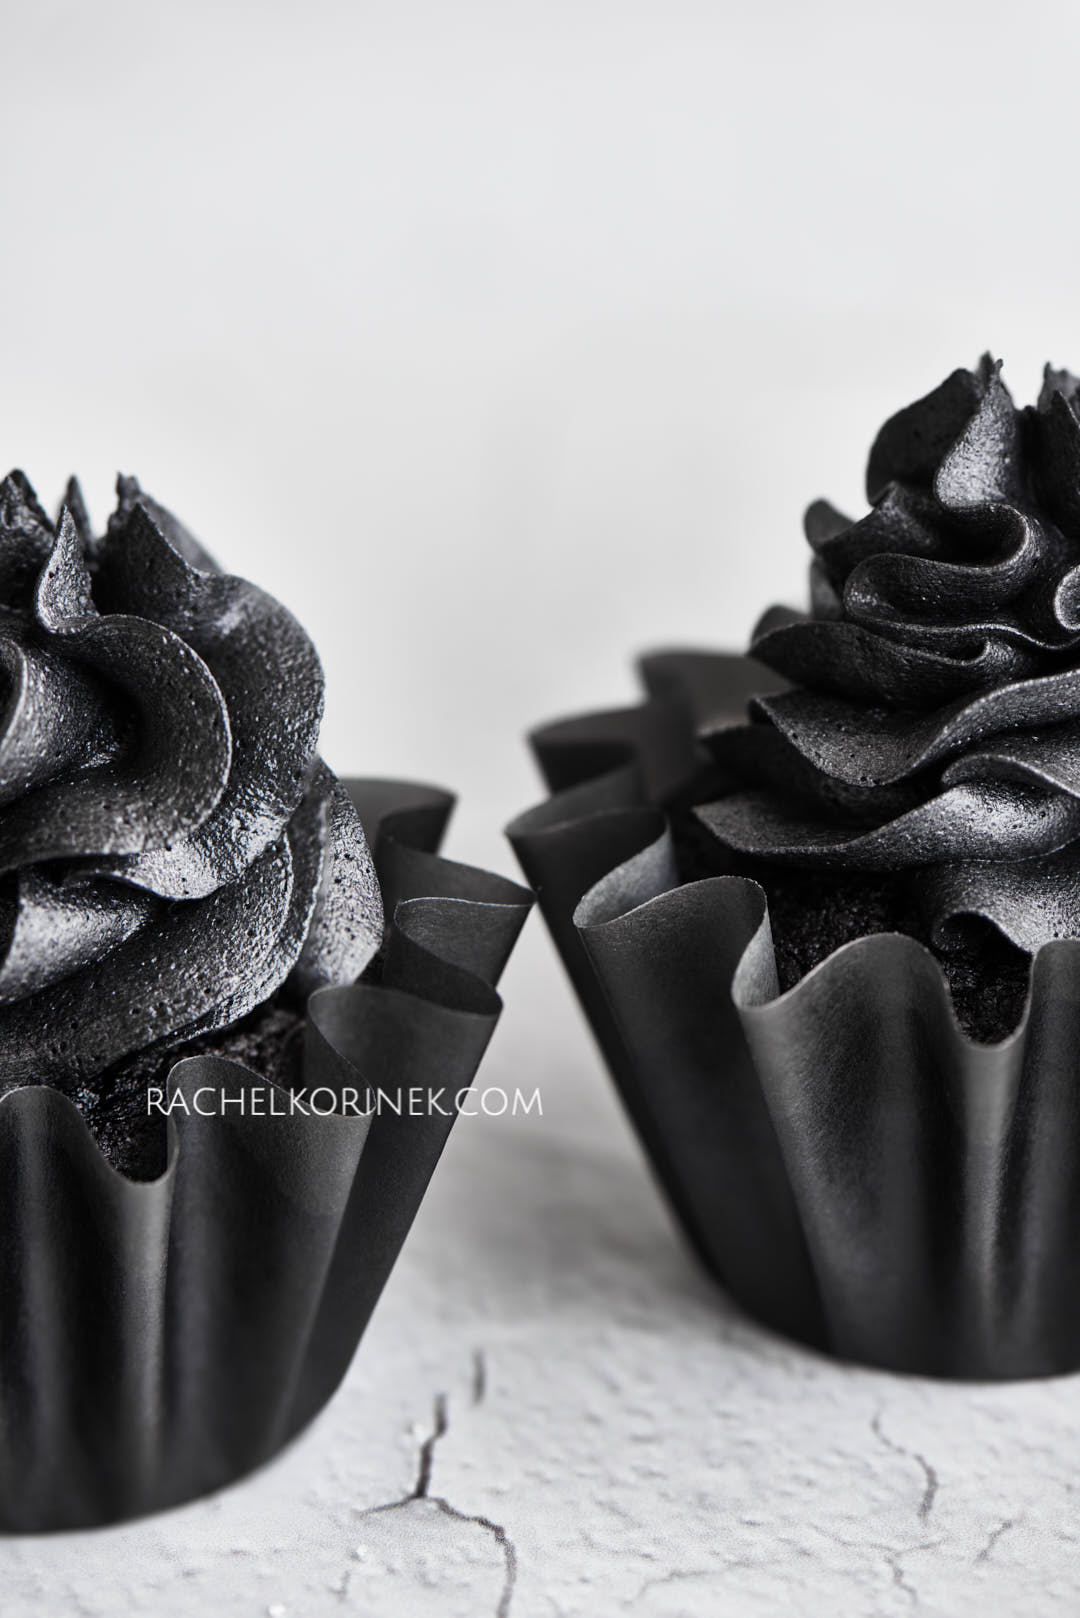 Black chocolate devils food cupcakes. An upclose macro shot. There isn't any colour to this photo so it appears black and white even thought it's real food!